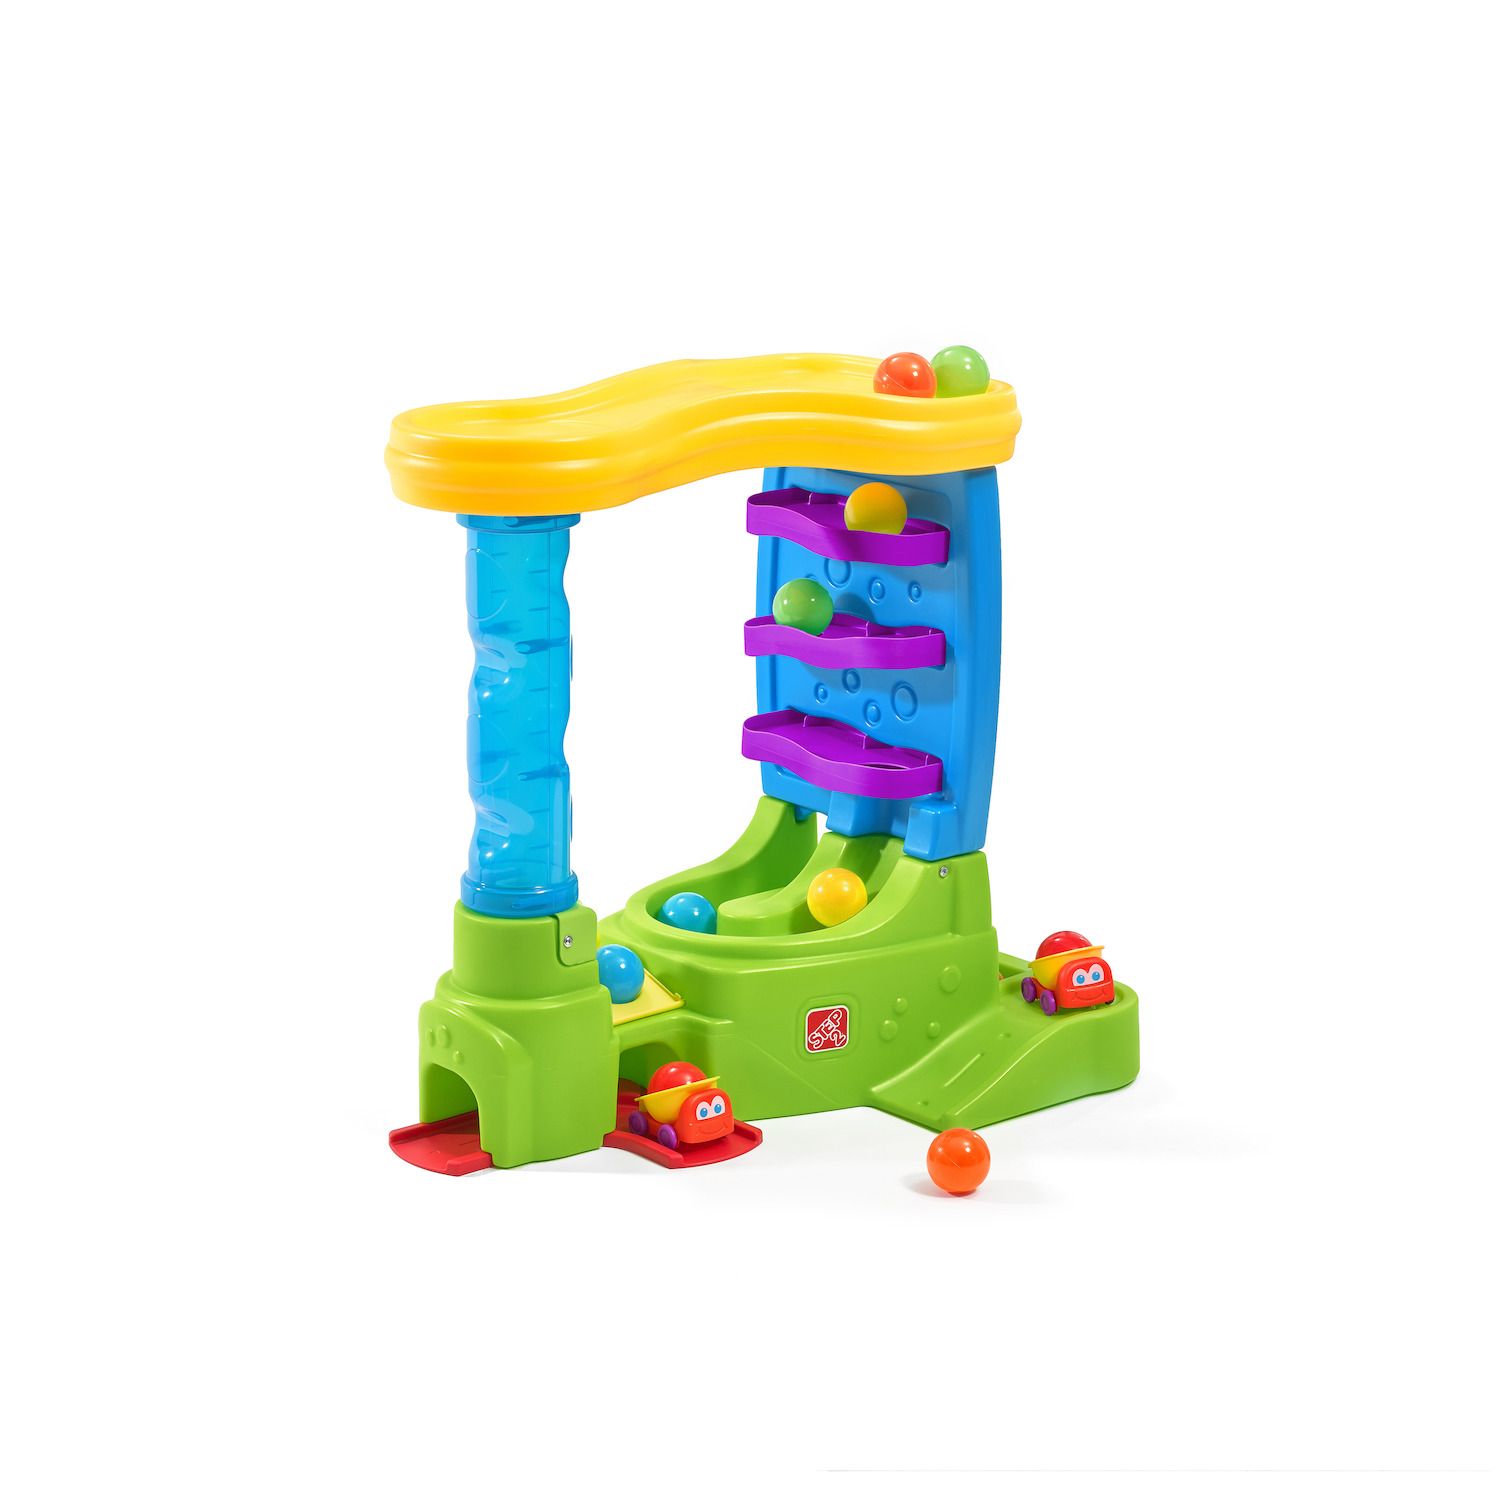 ball drop toy for toddlers